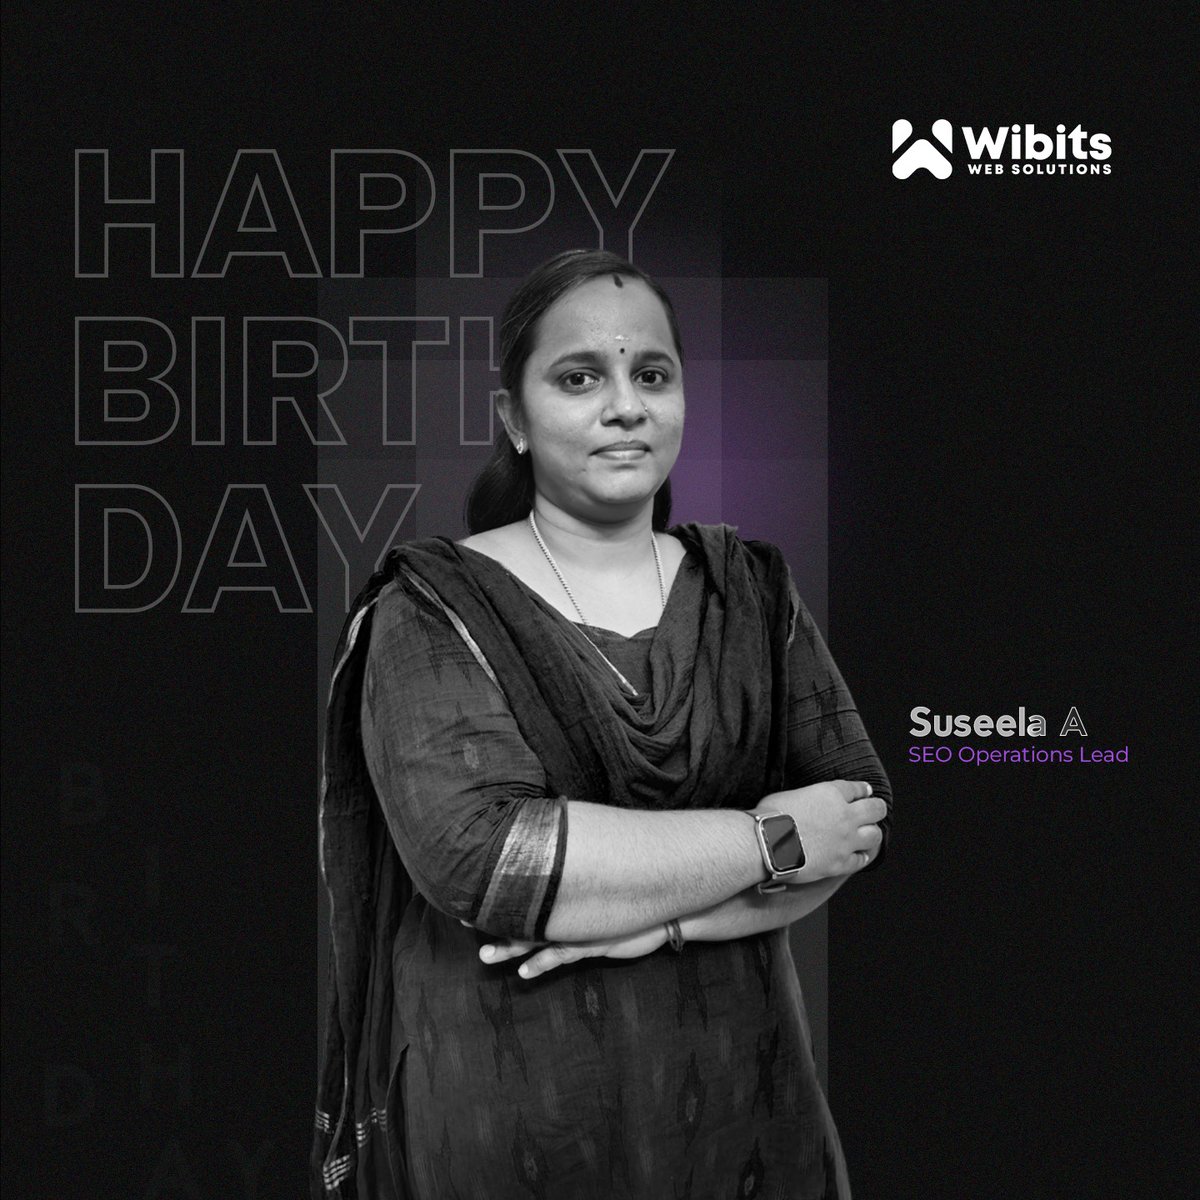 Happy Birthday 🎂 to Our Amazing SEO Operations Lead! 🎉Here's to many more years of success and shared memories.

From all of us at Wibits Web, we wish you a fantastic birthday🥳

#HappyBirthday #TeamCelebration #Company #BirthdayCelebration #wibits #BirthdayWishes #BirthdayFun